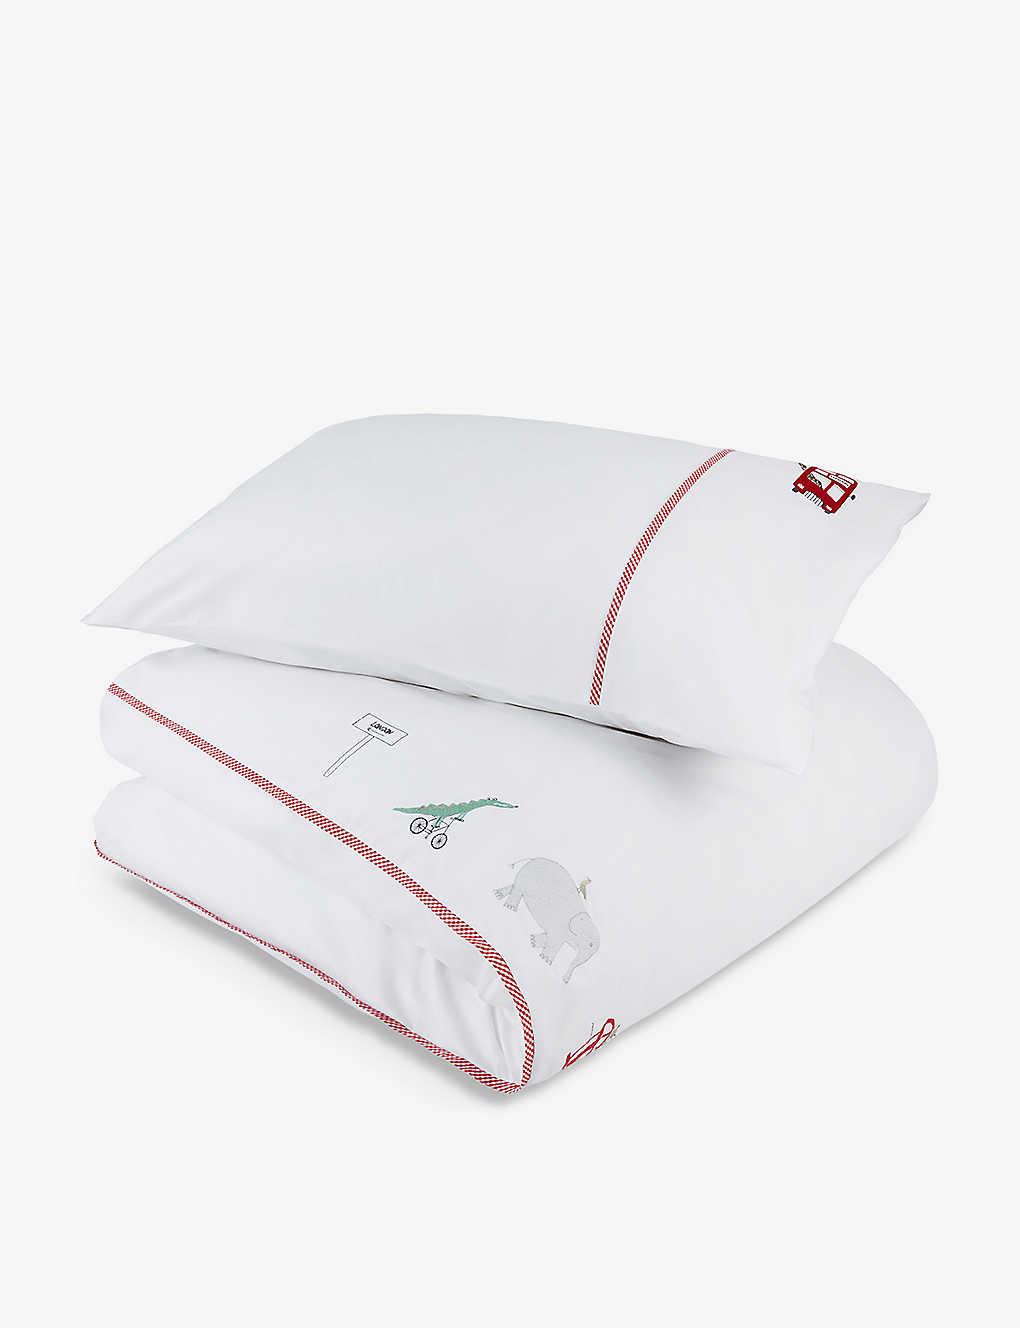 The Little White Company Multi London Animal Bus-embroidered Organic-cotton Single-bed Set 200cm X 1